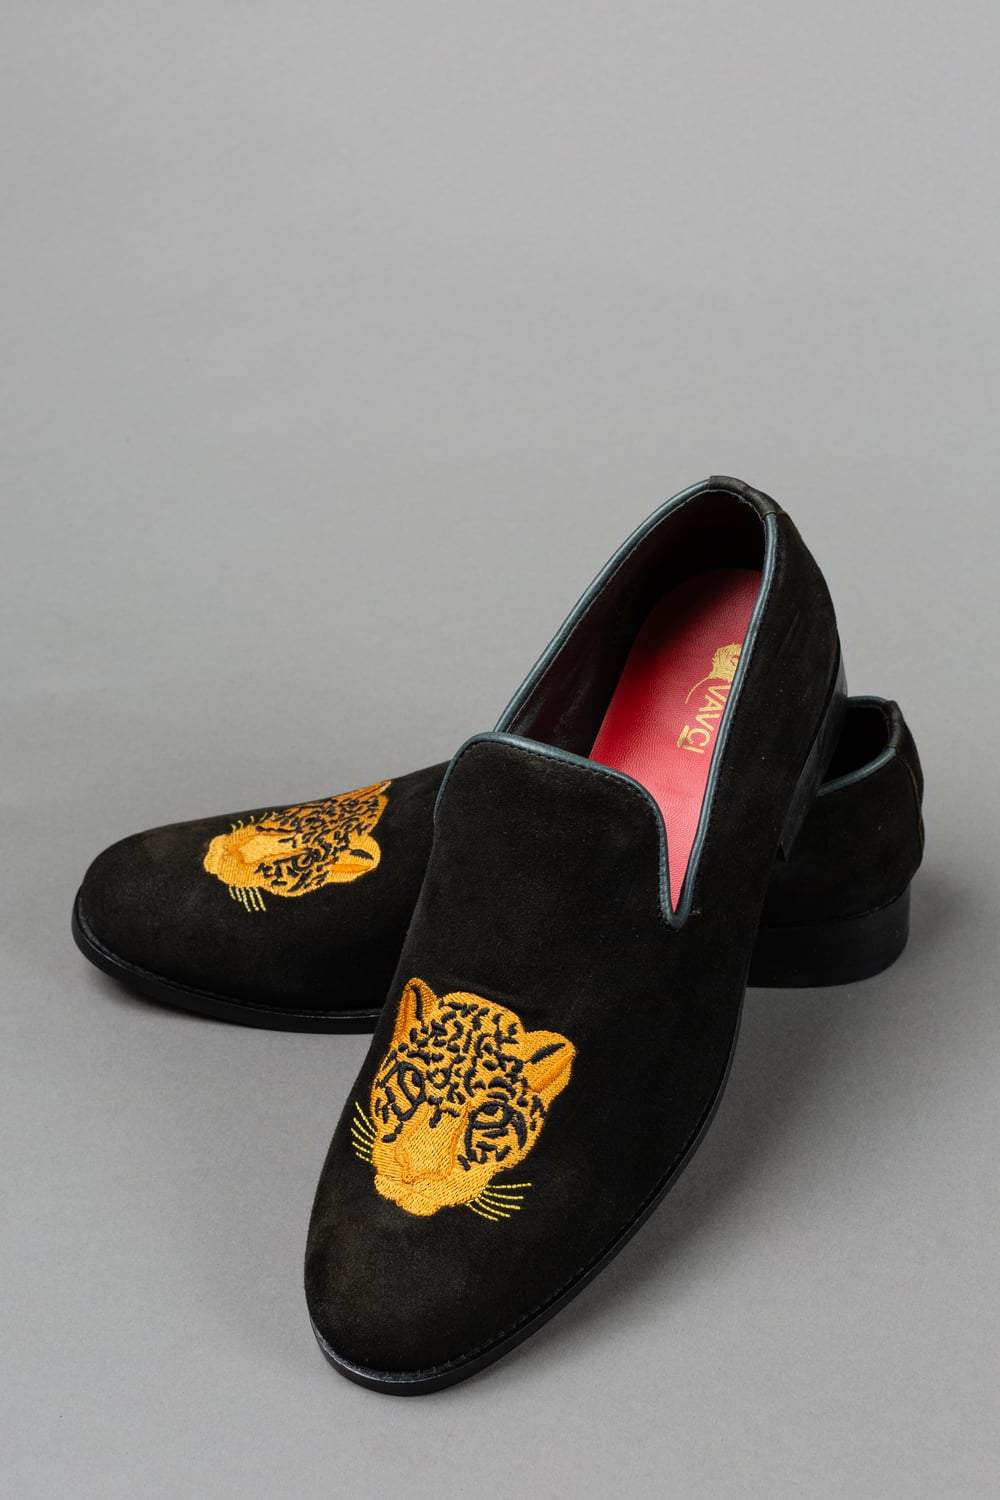 Embroidered Bespoke Shoe